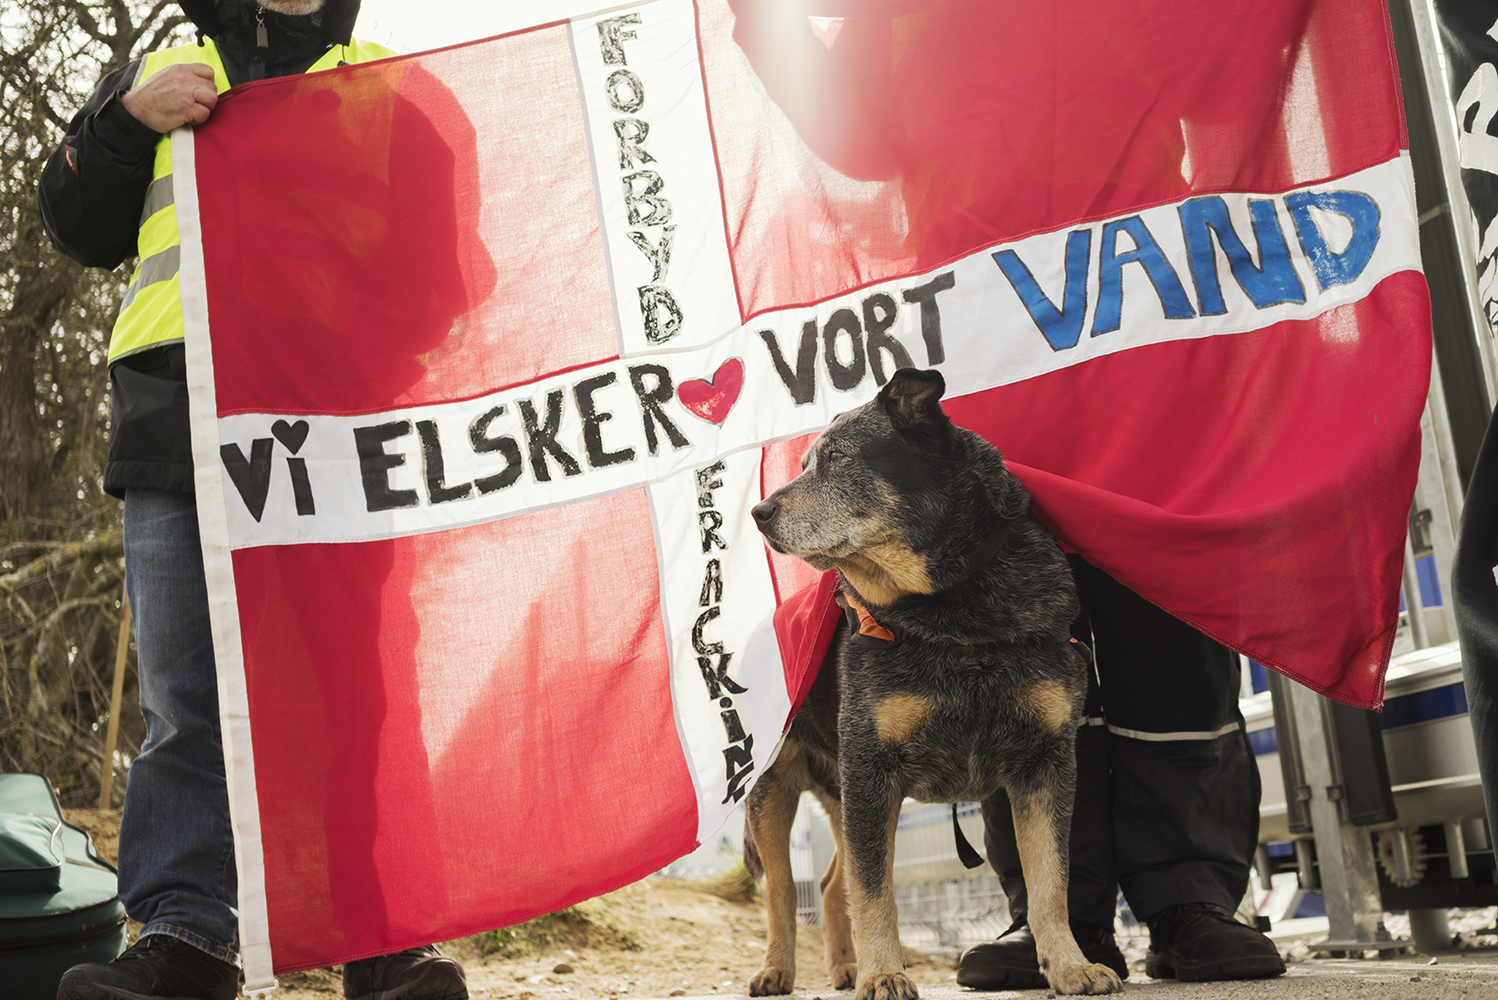 Anti-fracking protest in Dybvad, Denmark. Hydraulic fracturing, fracking, involves injecting a cocktail of water, sand and chemicals into the ground at high pressure in order to fracture the rocks and release the trapped gas.The French company Total was granted approval to explore for shale gas despite strong protests from the local community.